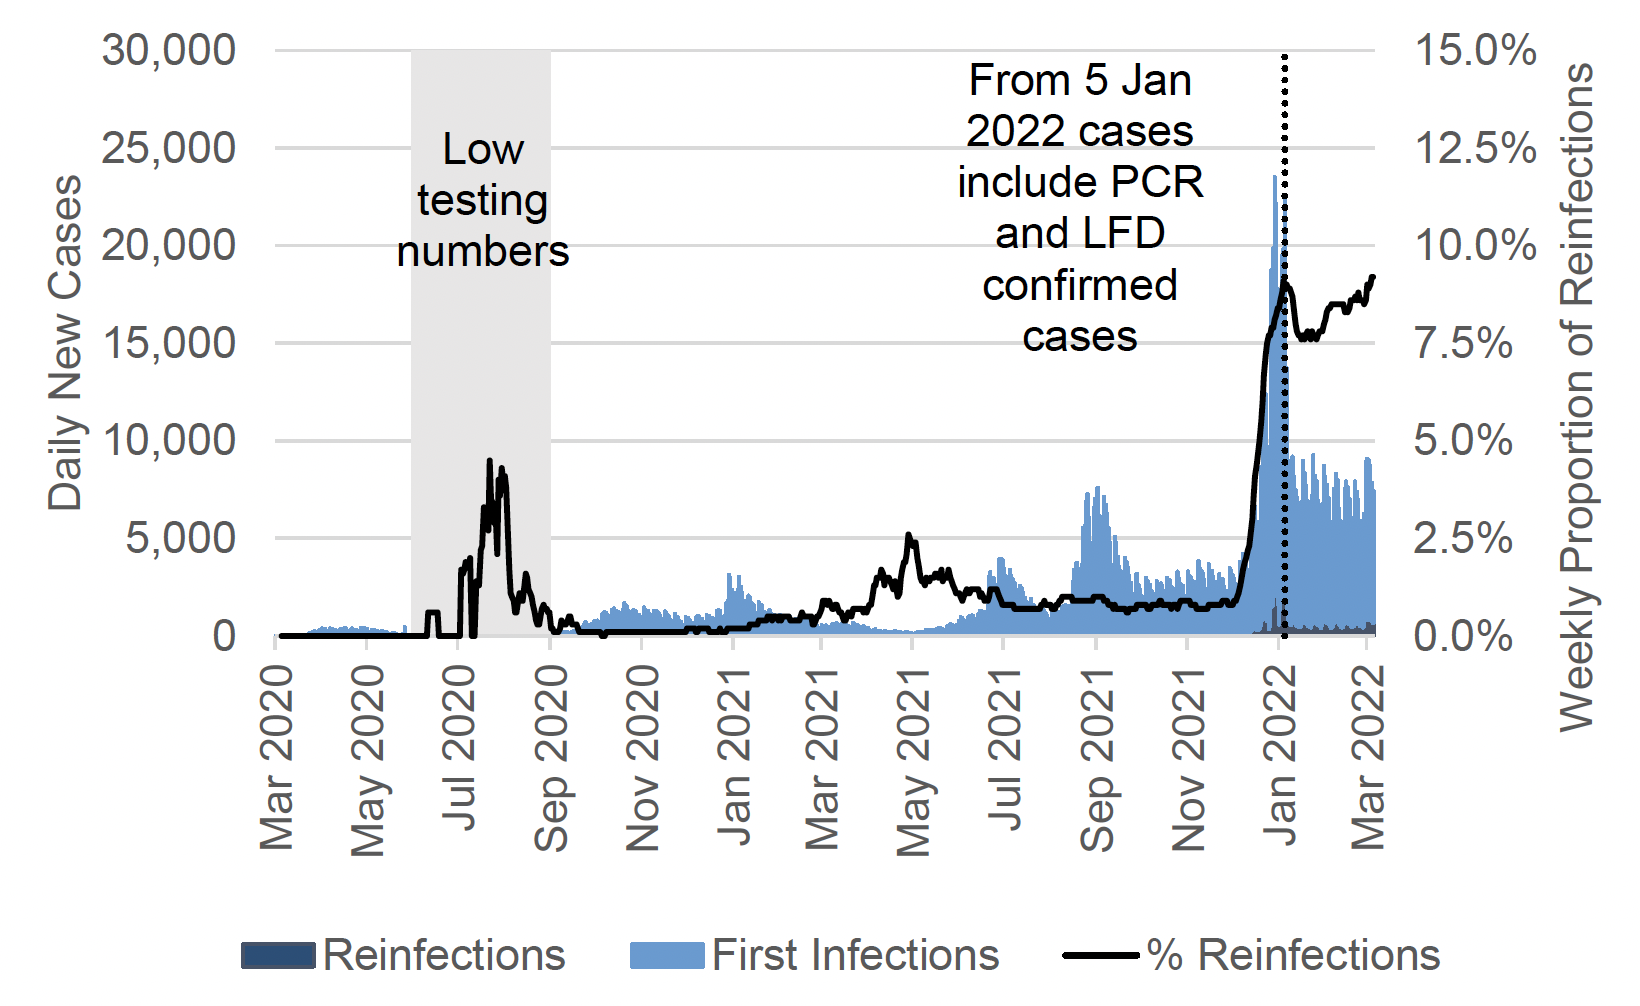 a bar chart showing daily PCR and LFD case numbers by episode of infection (first infection or reinfection) by specimen date from March 2020 to March 2022 with a line showing the seven-day average proportion of daily cases that are reinfections. The number of daily reinfection cases is not visible until late 2022. The seven-day average proportion of reinfections peaked in July 2020, April 2021 and early January 2022, and increased to its highest levels so far in March 2022. The chart has a note that says: “from 5 January 2022 cases include PCR and LFD confirmed cases”. Before 5 January 2022, the case rate includes only PCR confirmed cases.